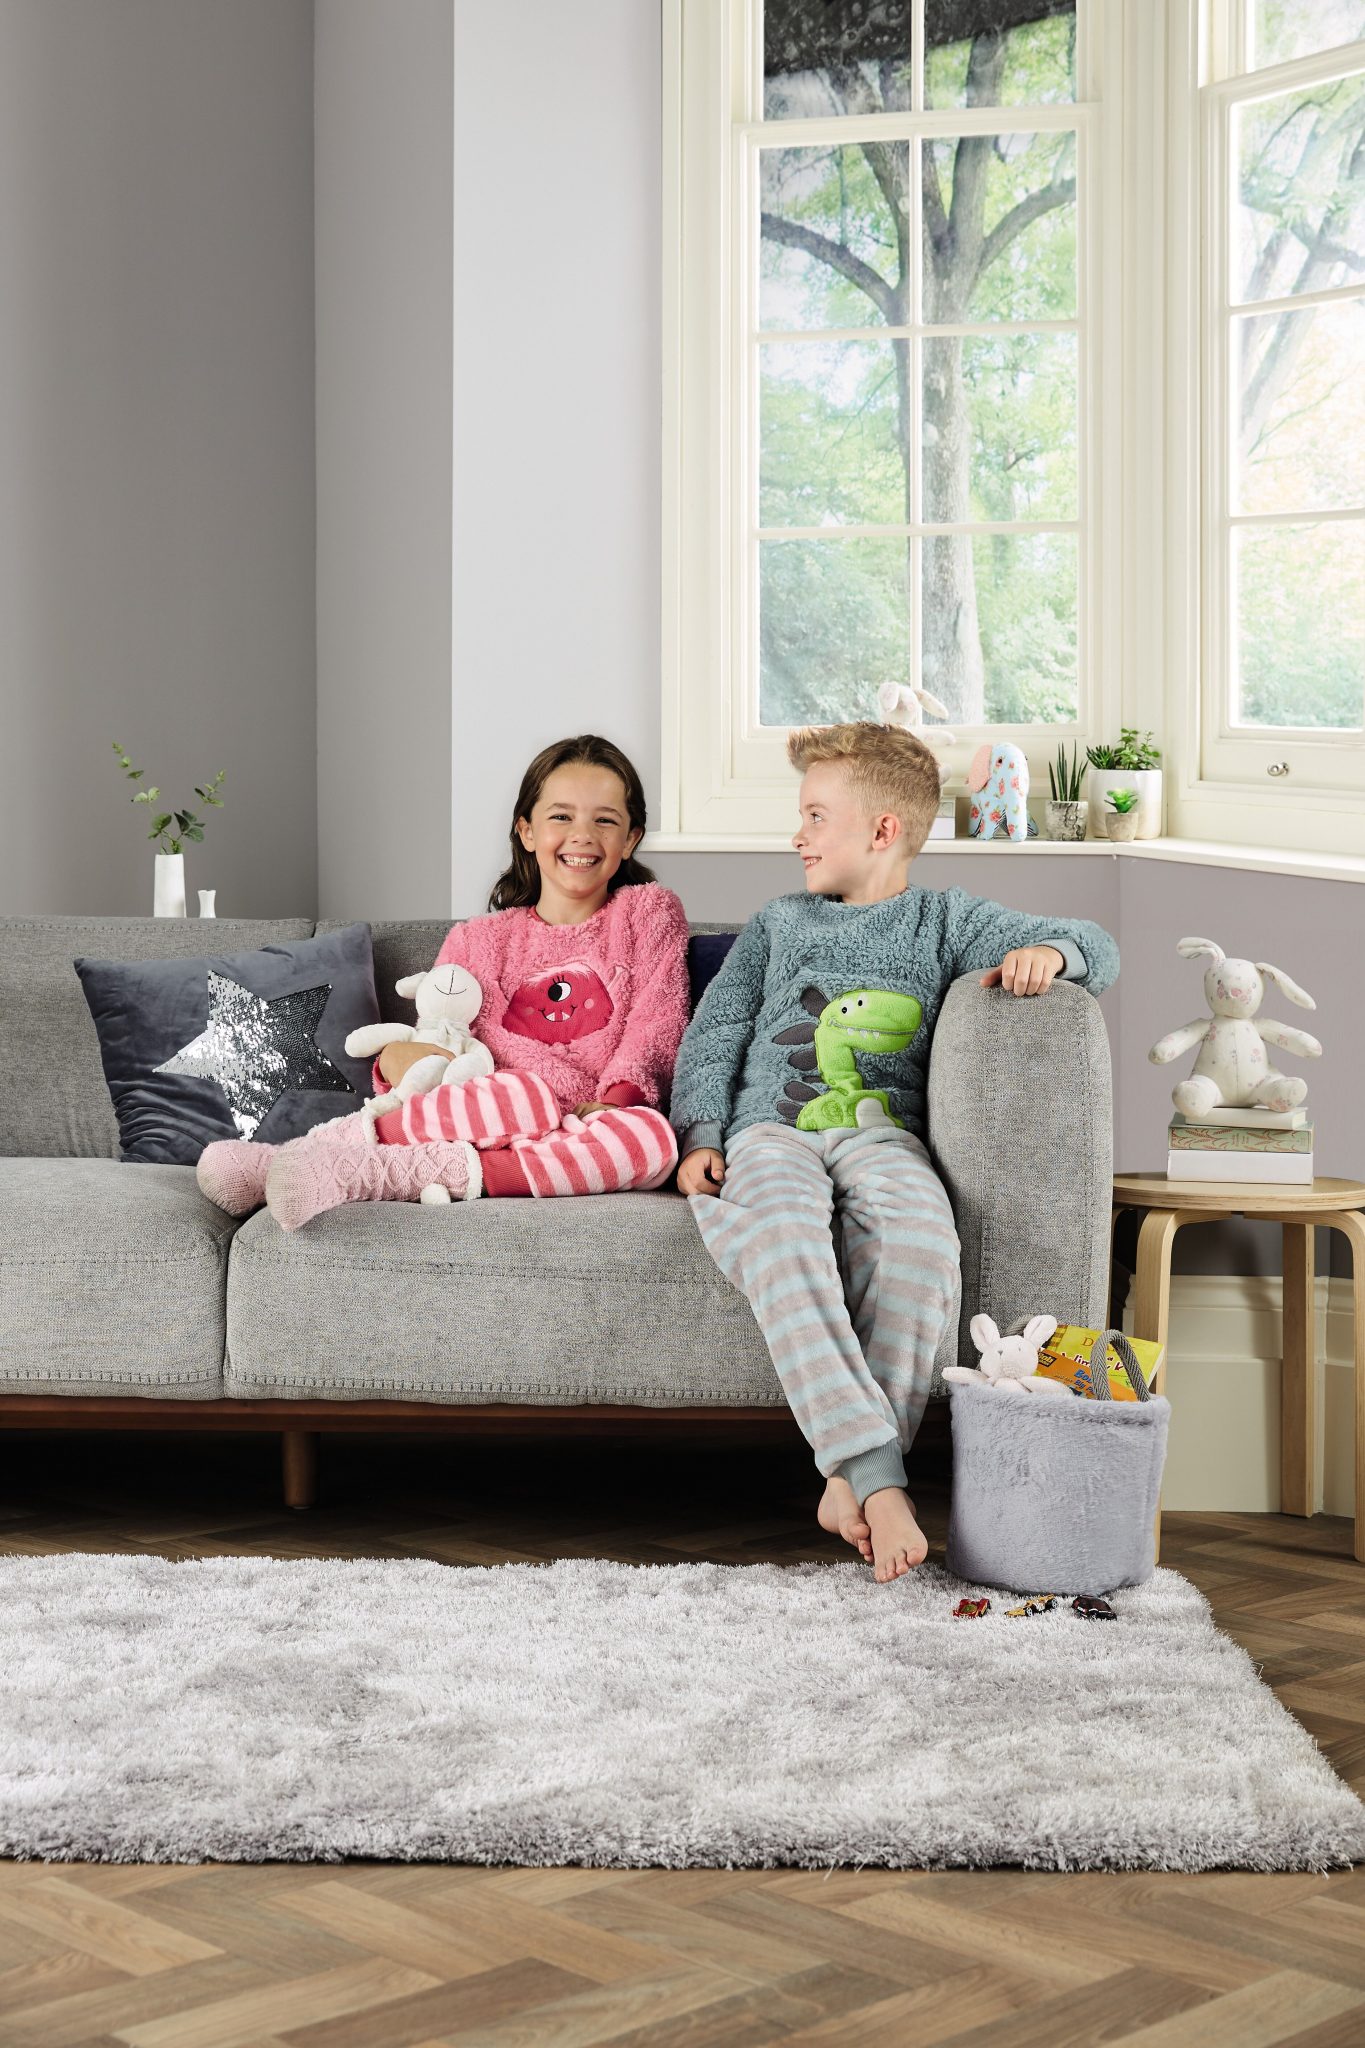 Aldi have some cozy kiddie bits coming out just in time for the colder weather